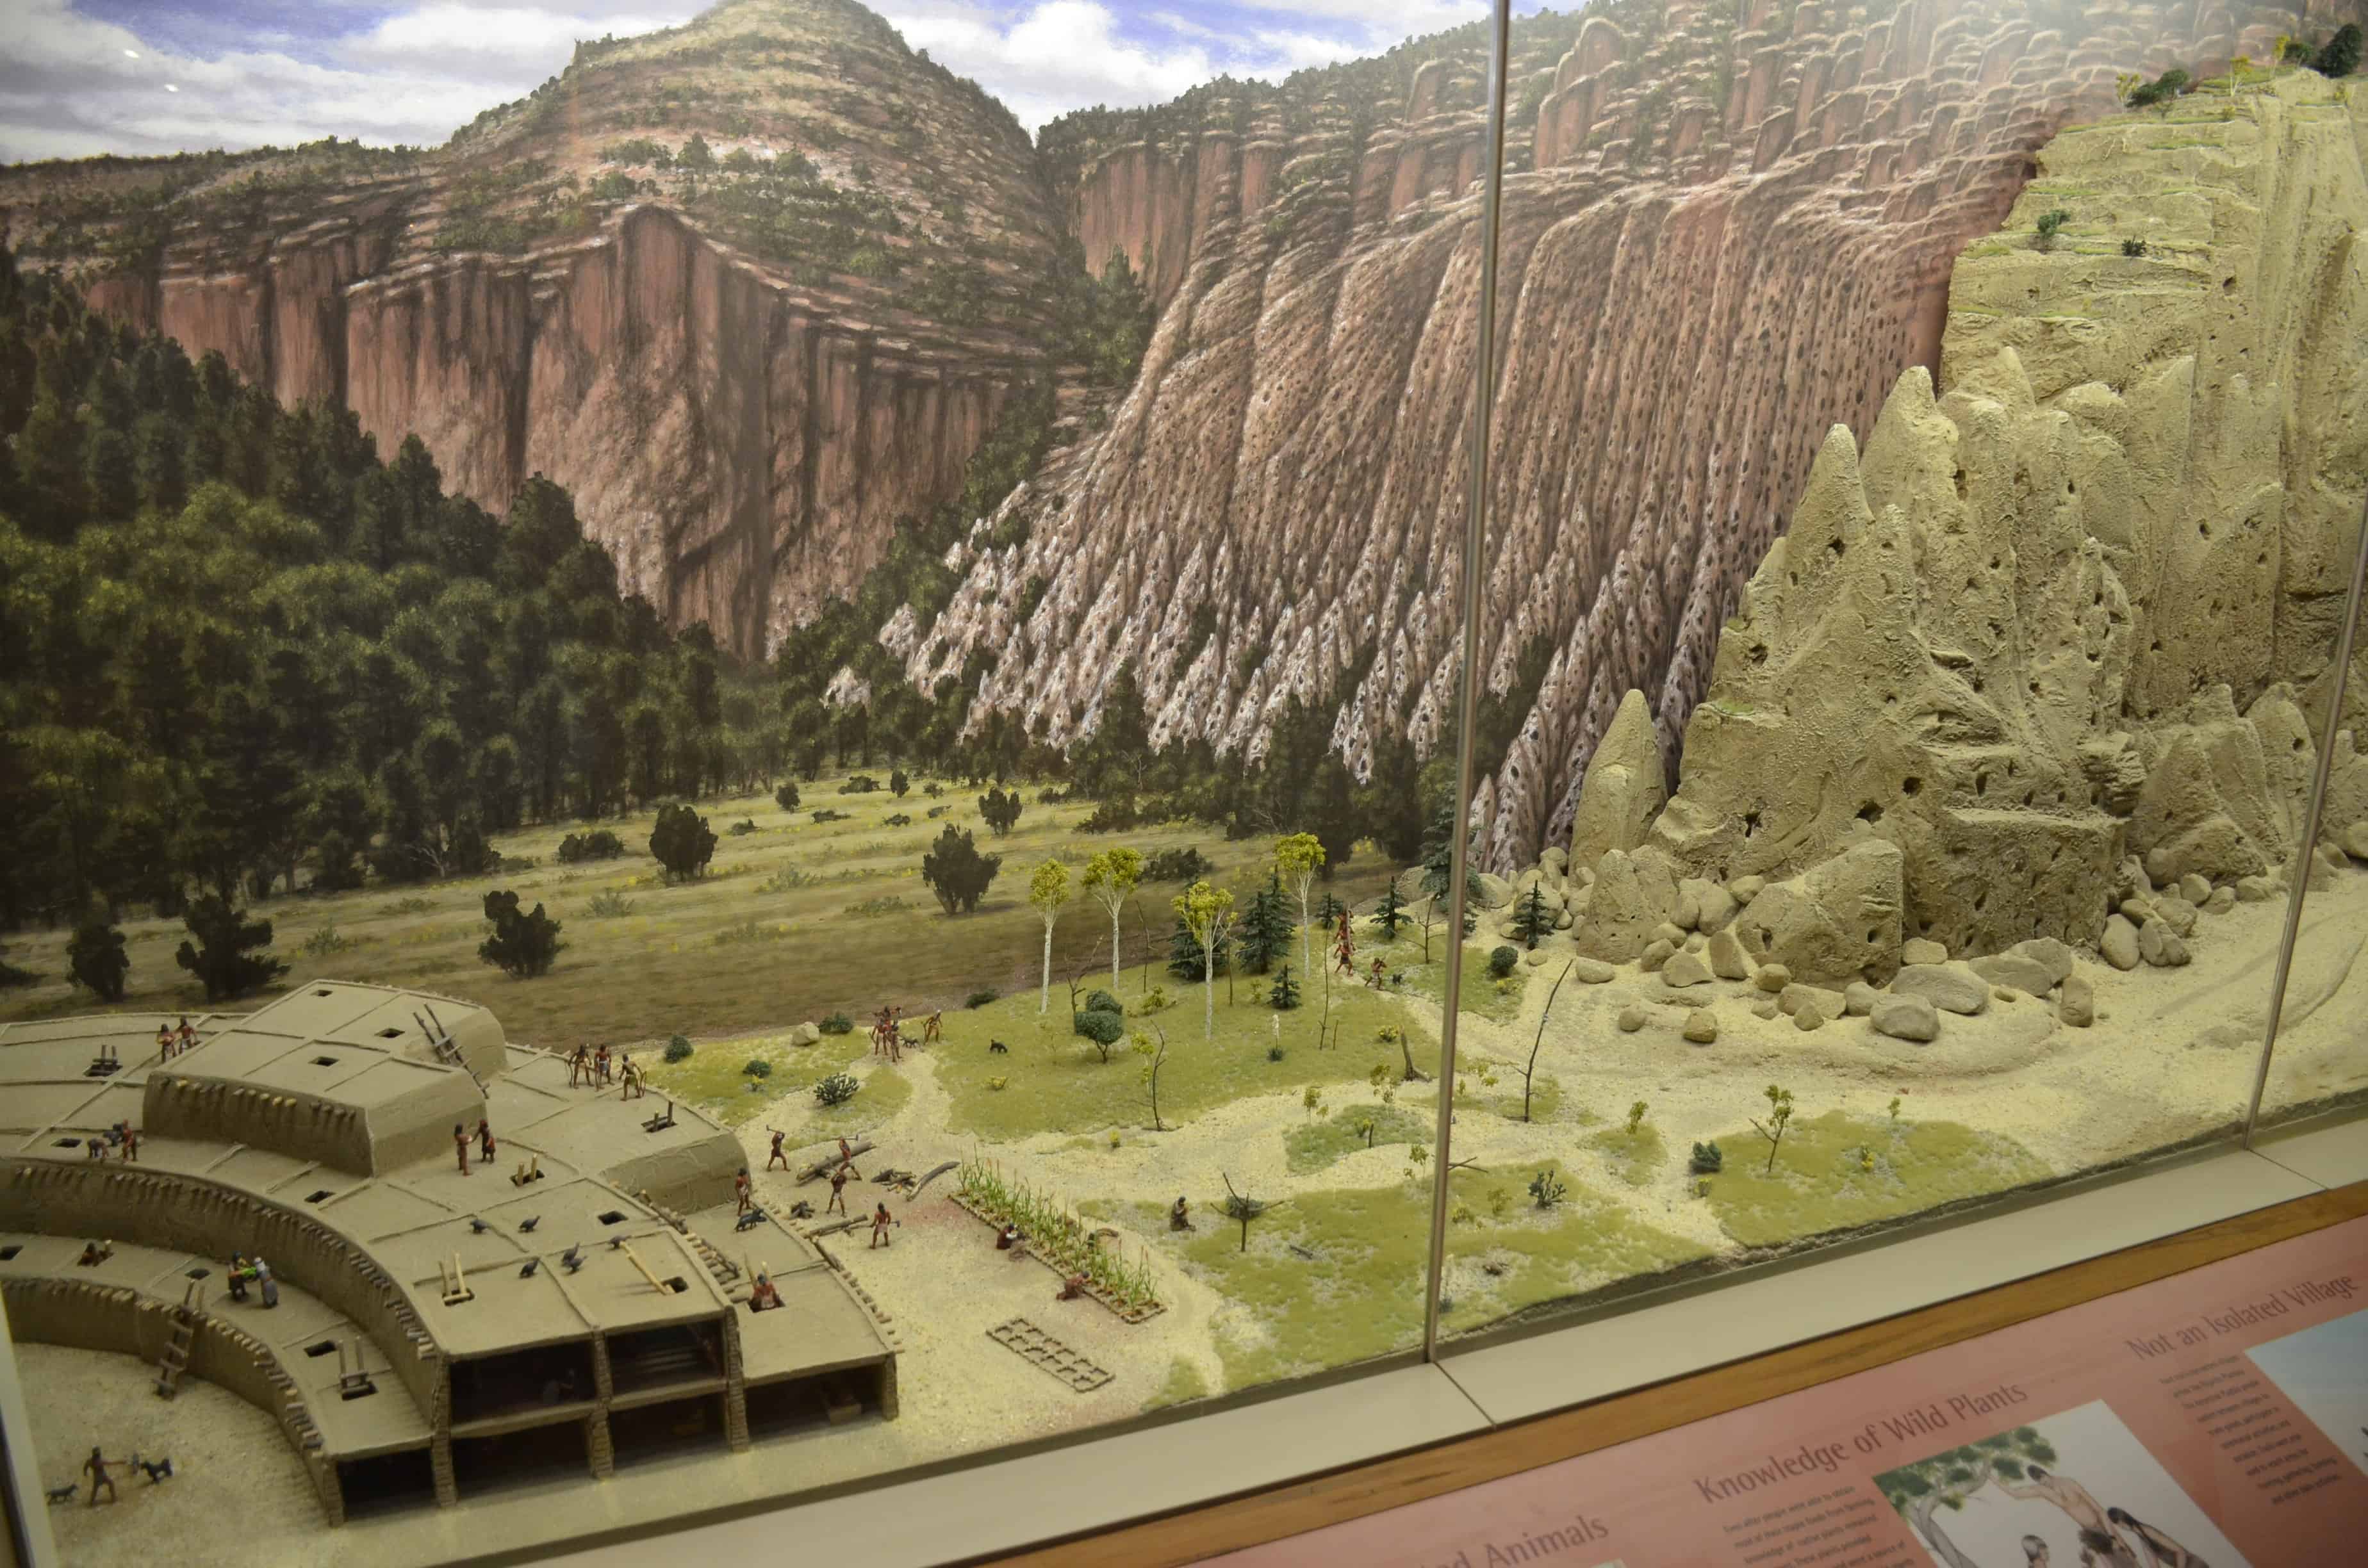 Frijoles Canyon Visitor Center at Bandelier National Monument in New Mexico